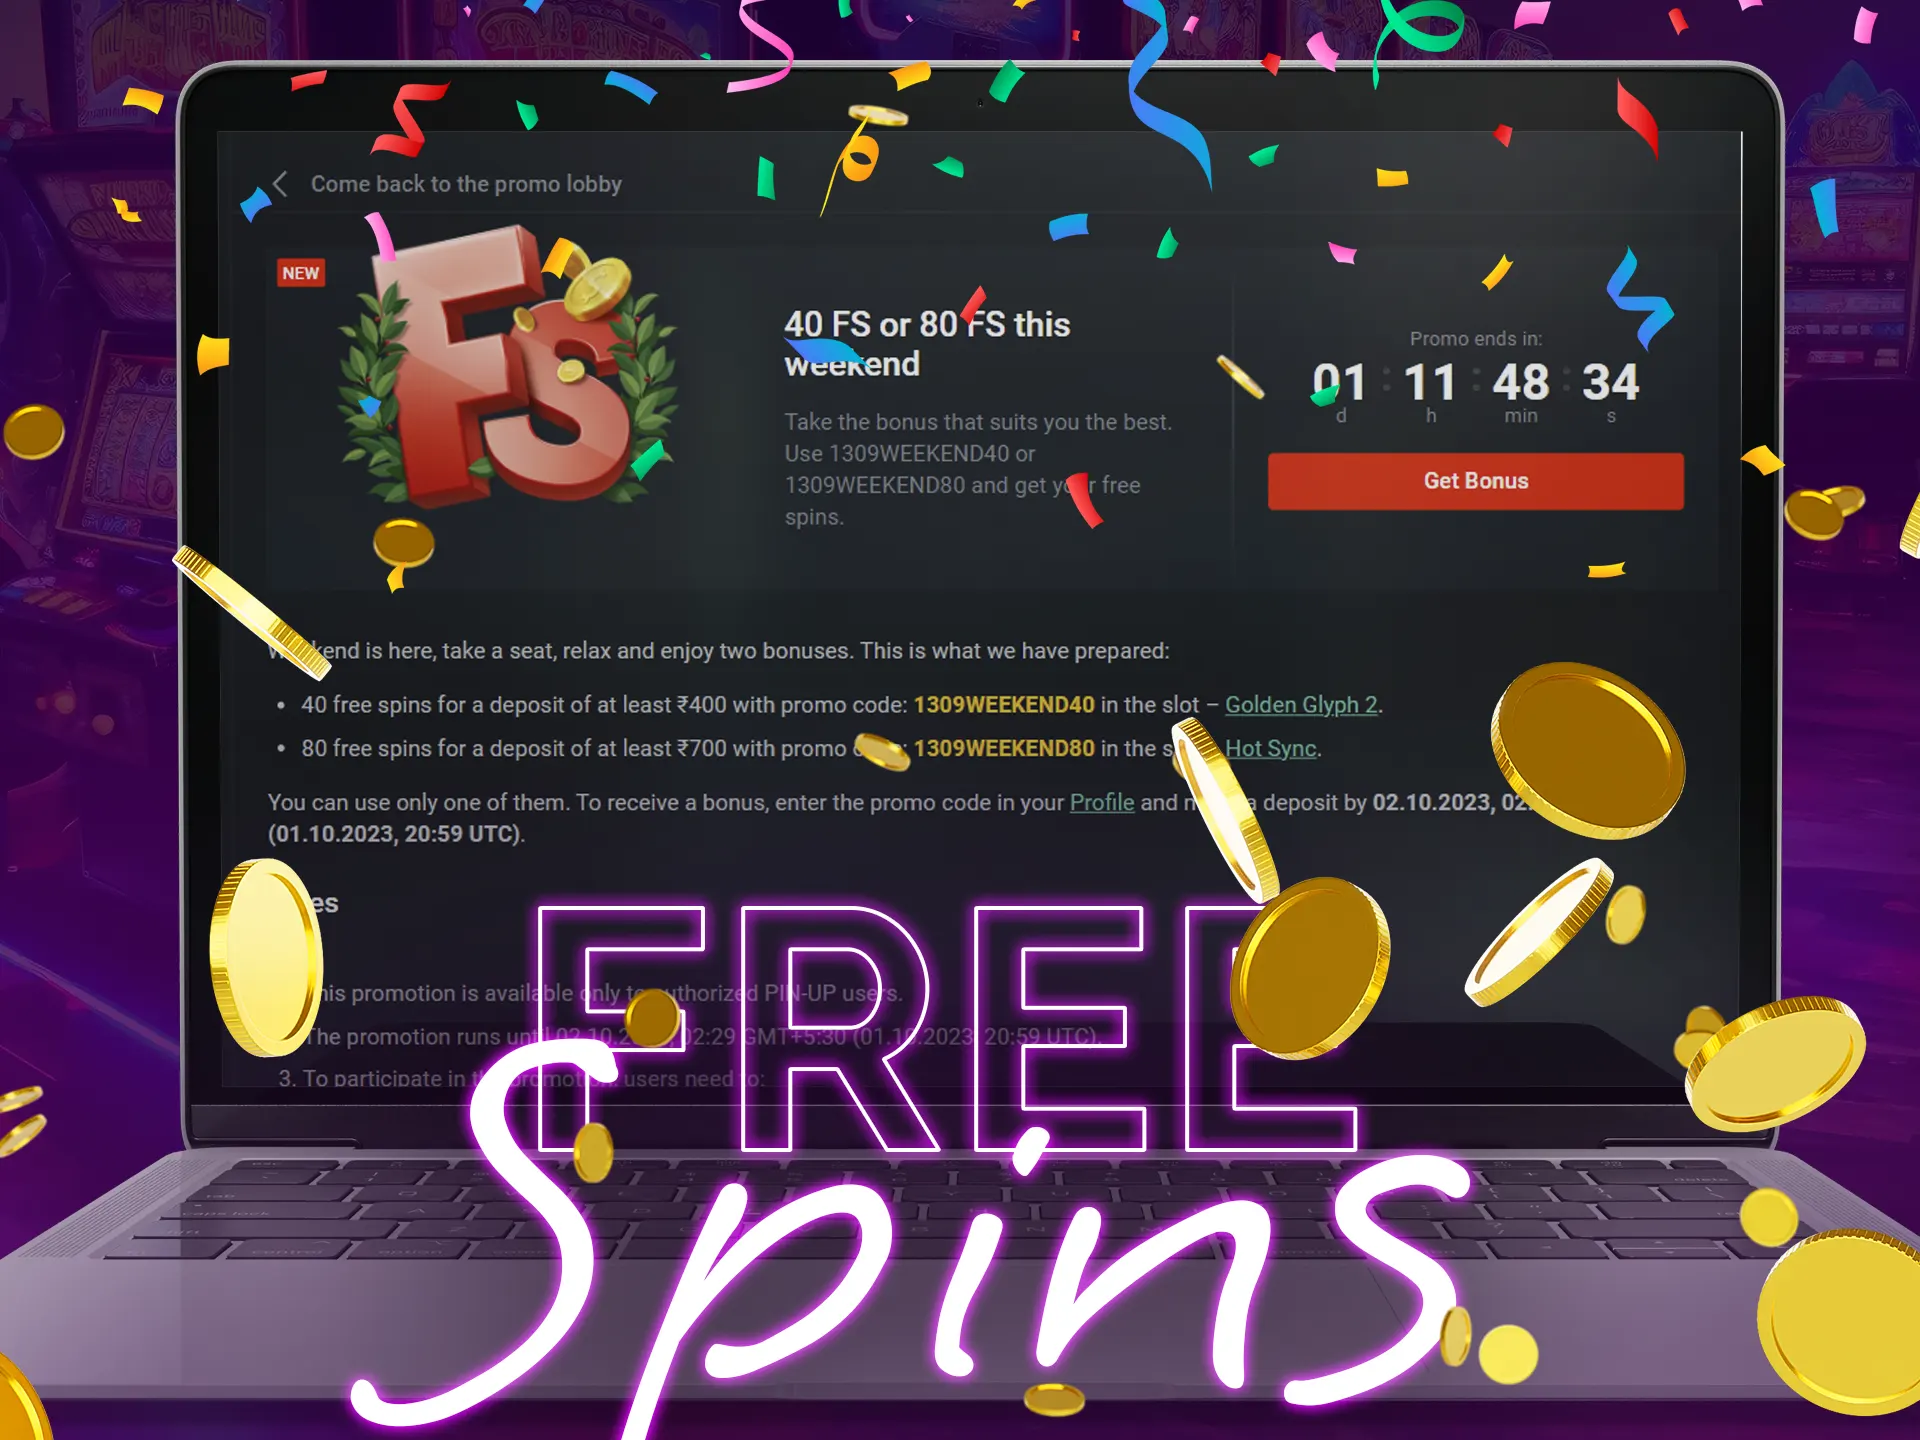 Enjoy free spins as a part of welcome bonus for slots!